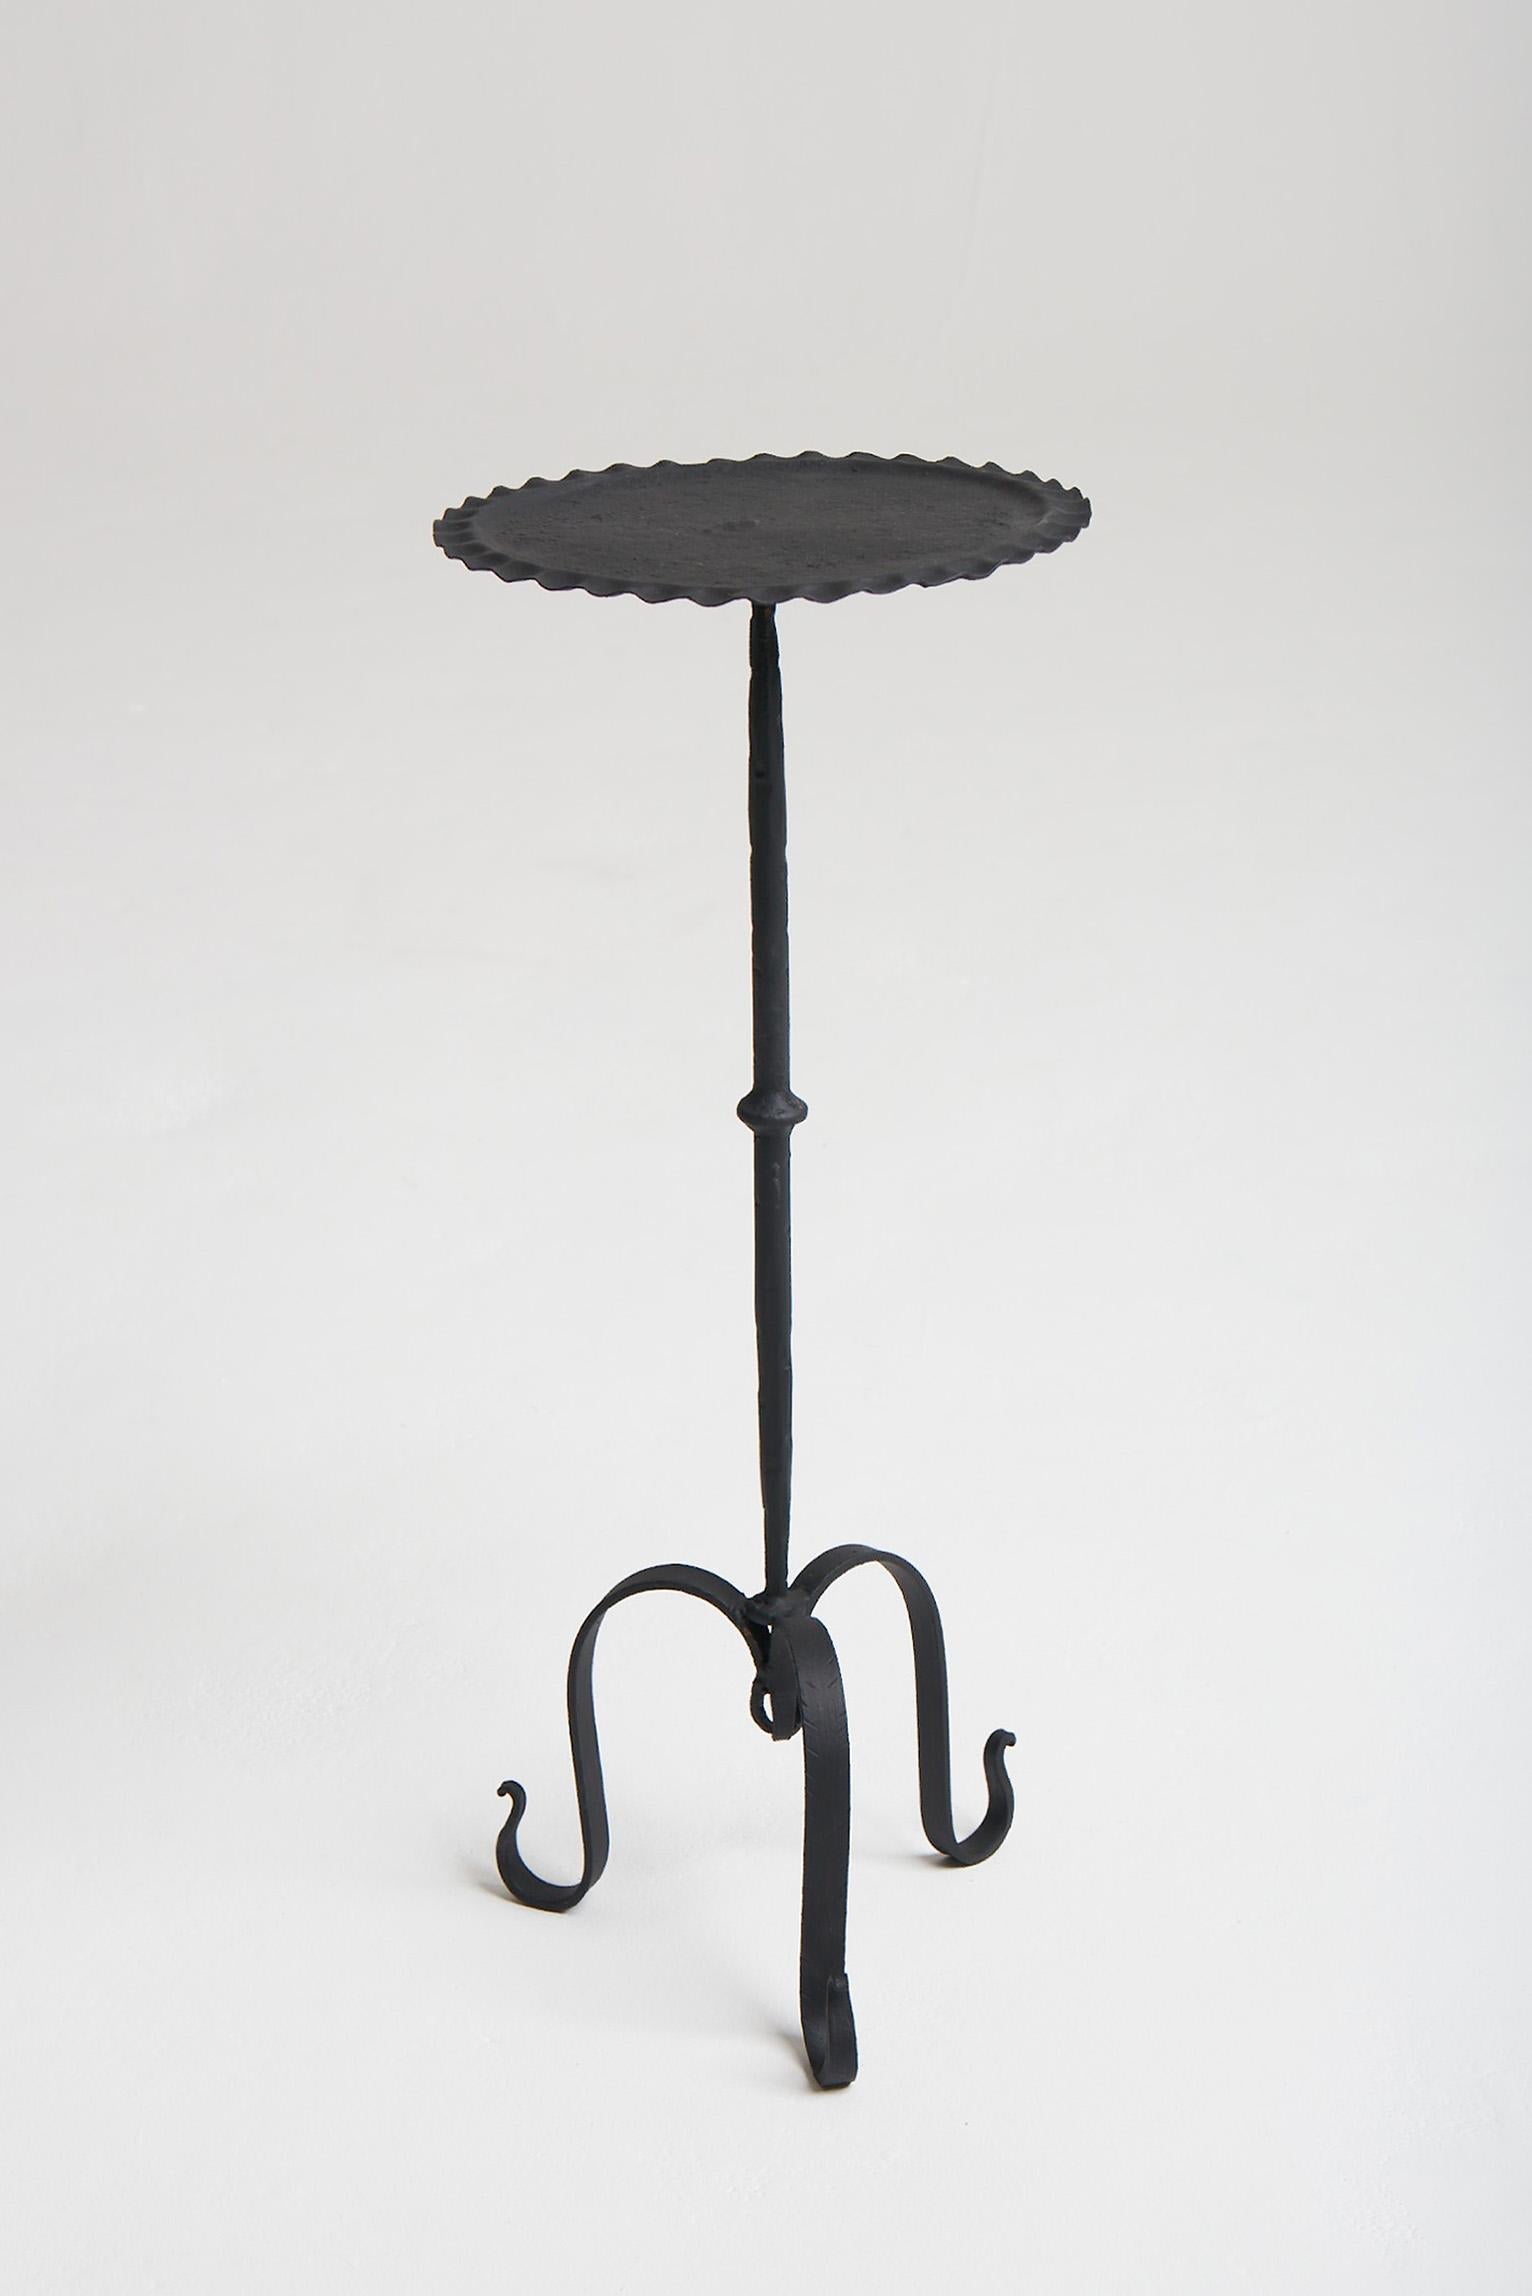 A black enameled wrought iron martini table.
Spain, third quarter of the 20th century.